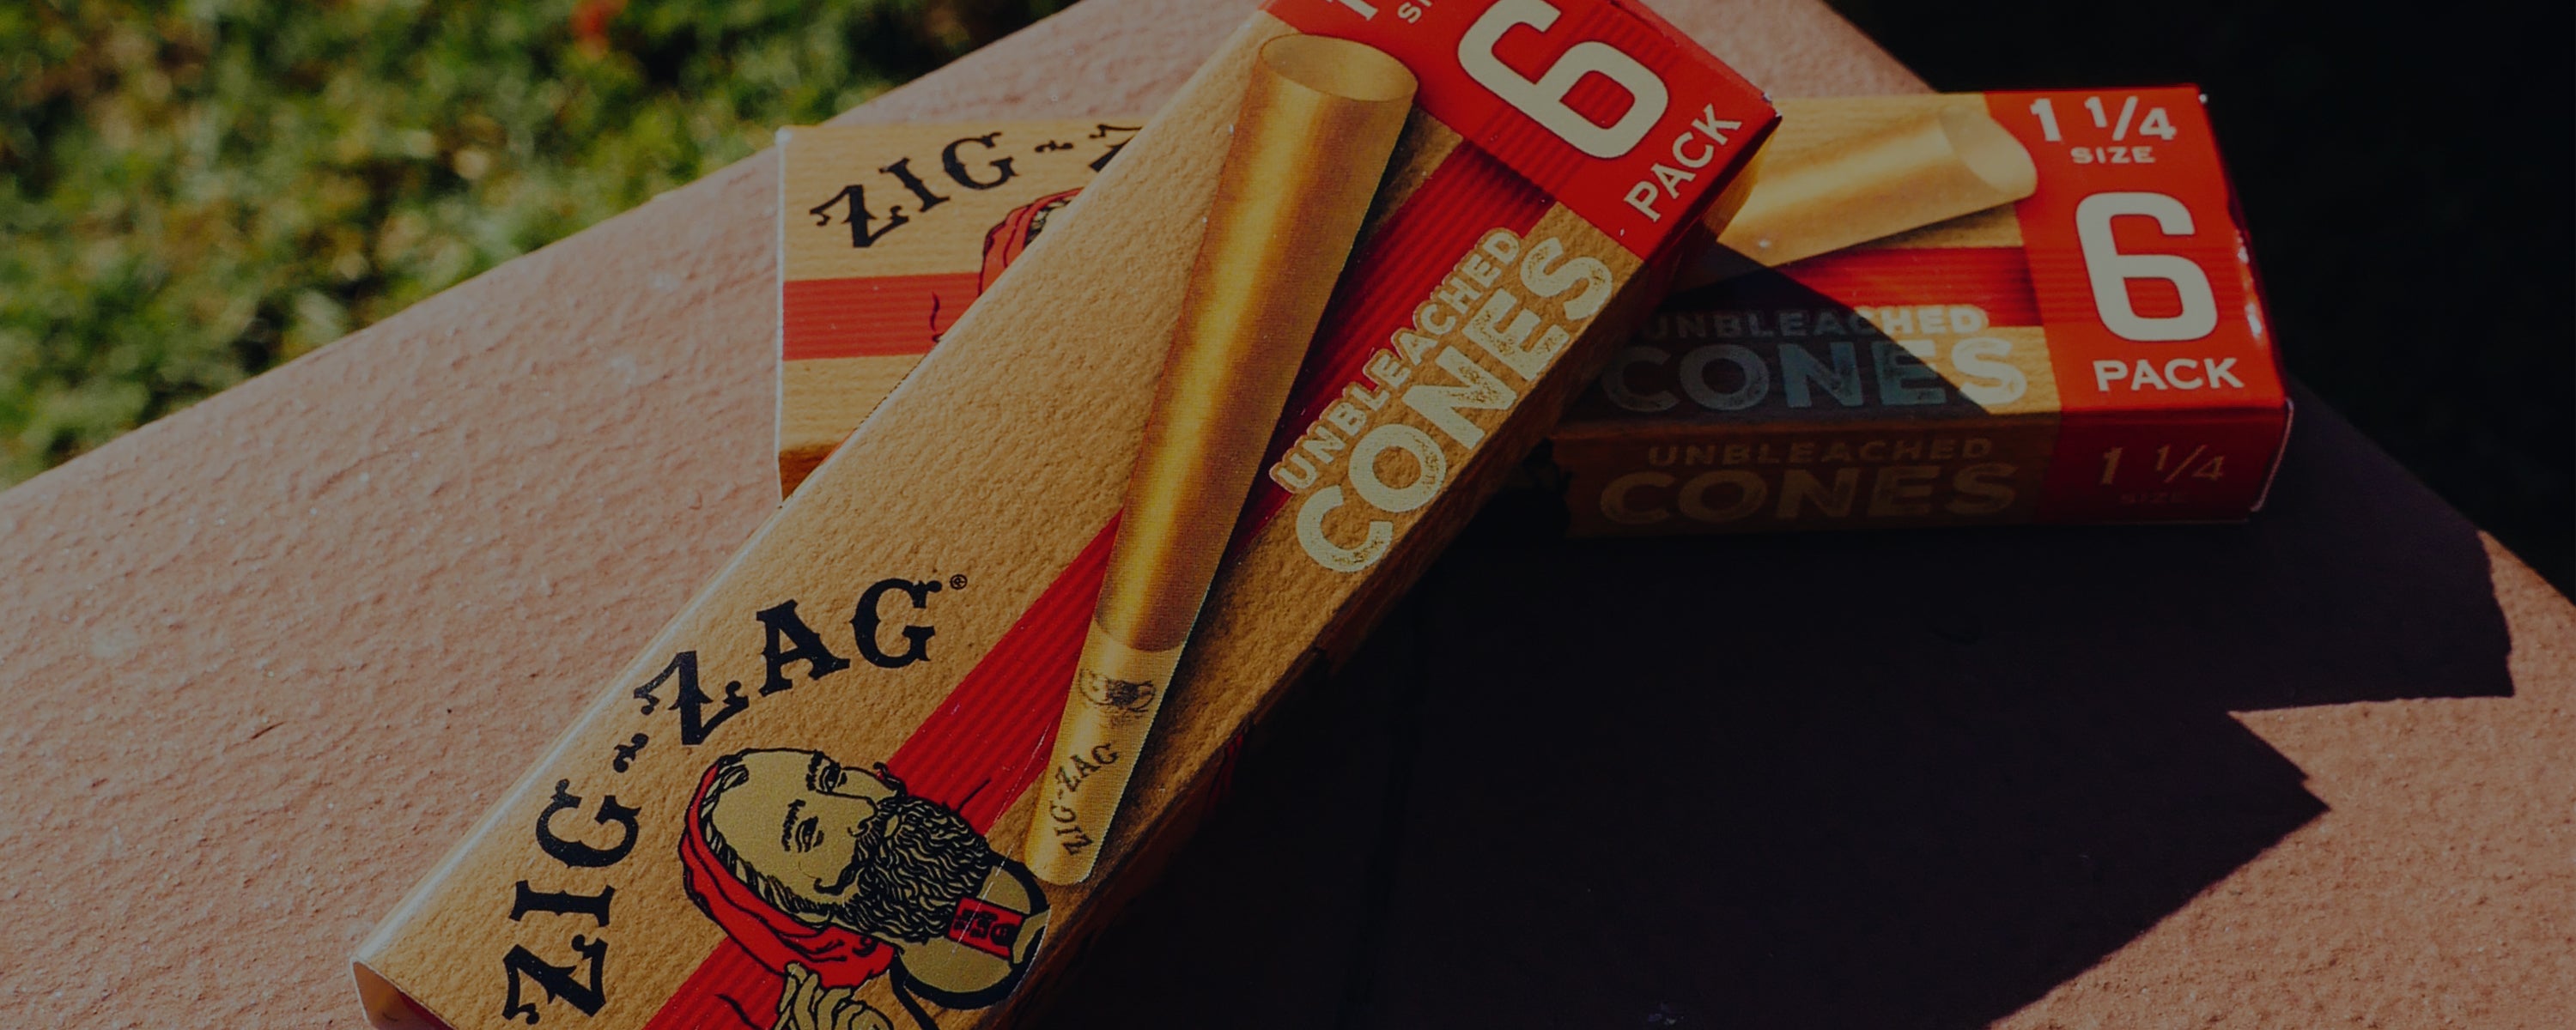 Zig Zag Unbleached Cones King Size - BC Smoke Shop